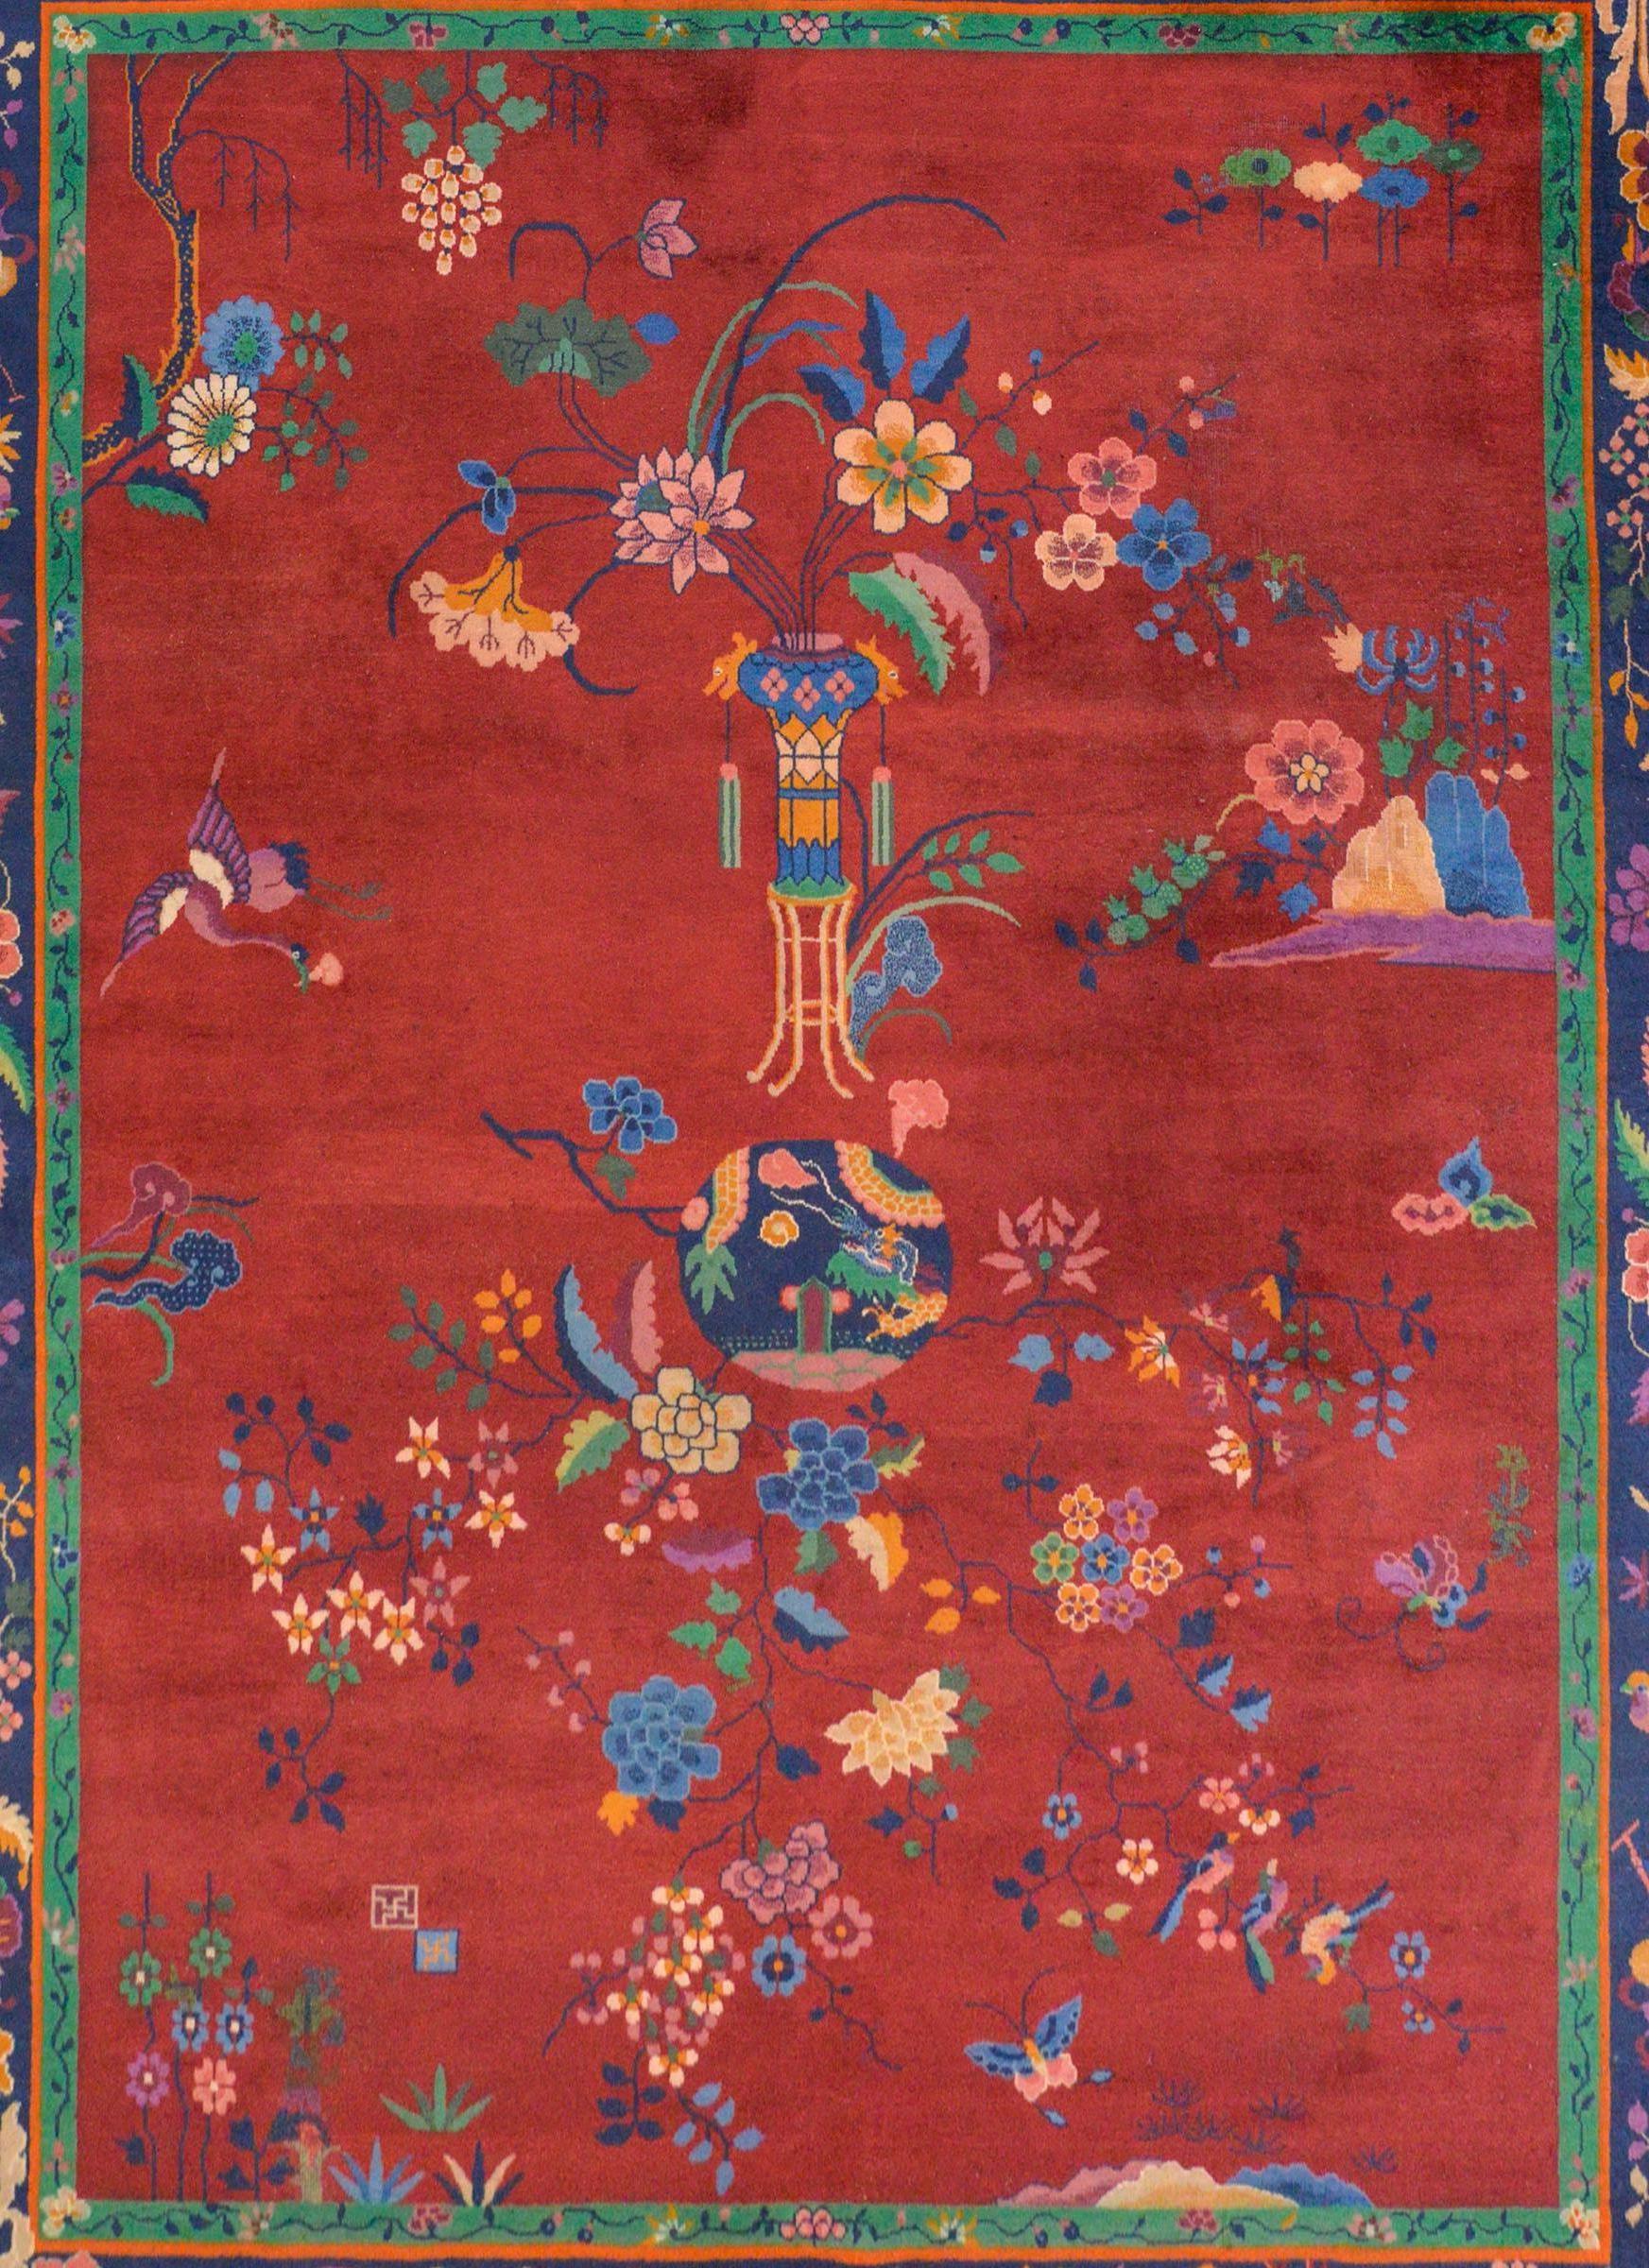 An awesome Chinese Art Deco rug with a wonderful pattern containing a vase on stand potted with flowering chrysanthemum, lotus, and prunus blossoms on one side, with a wildly expressive floral pattern on the other, all woven in myriad colors on a